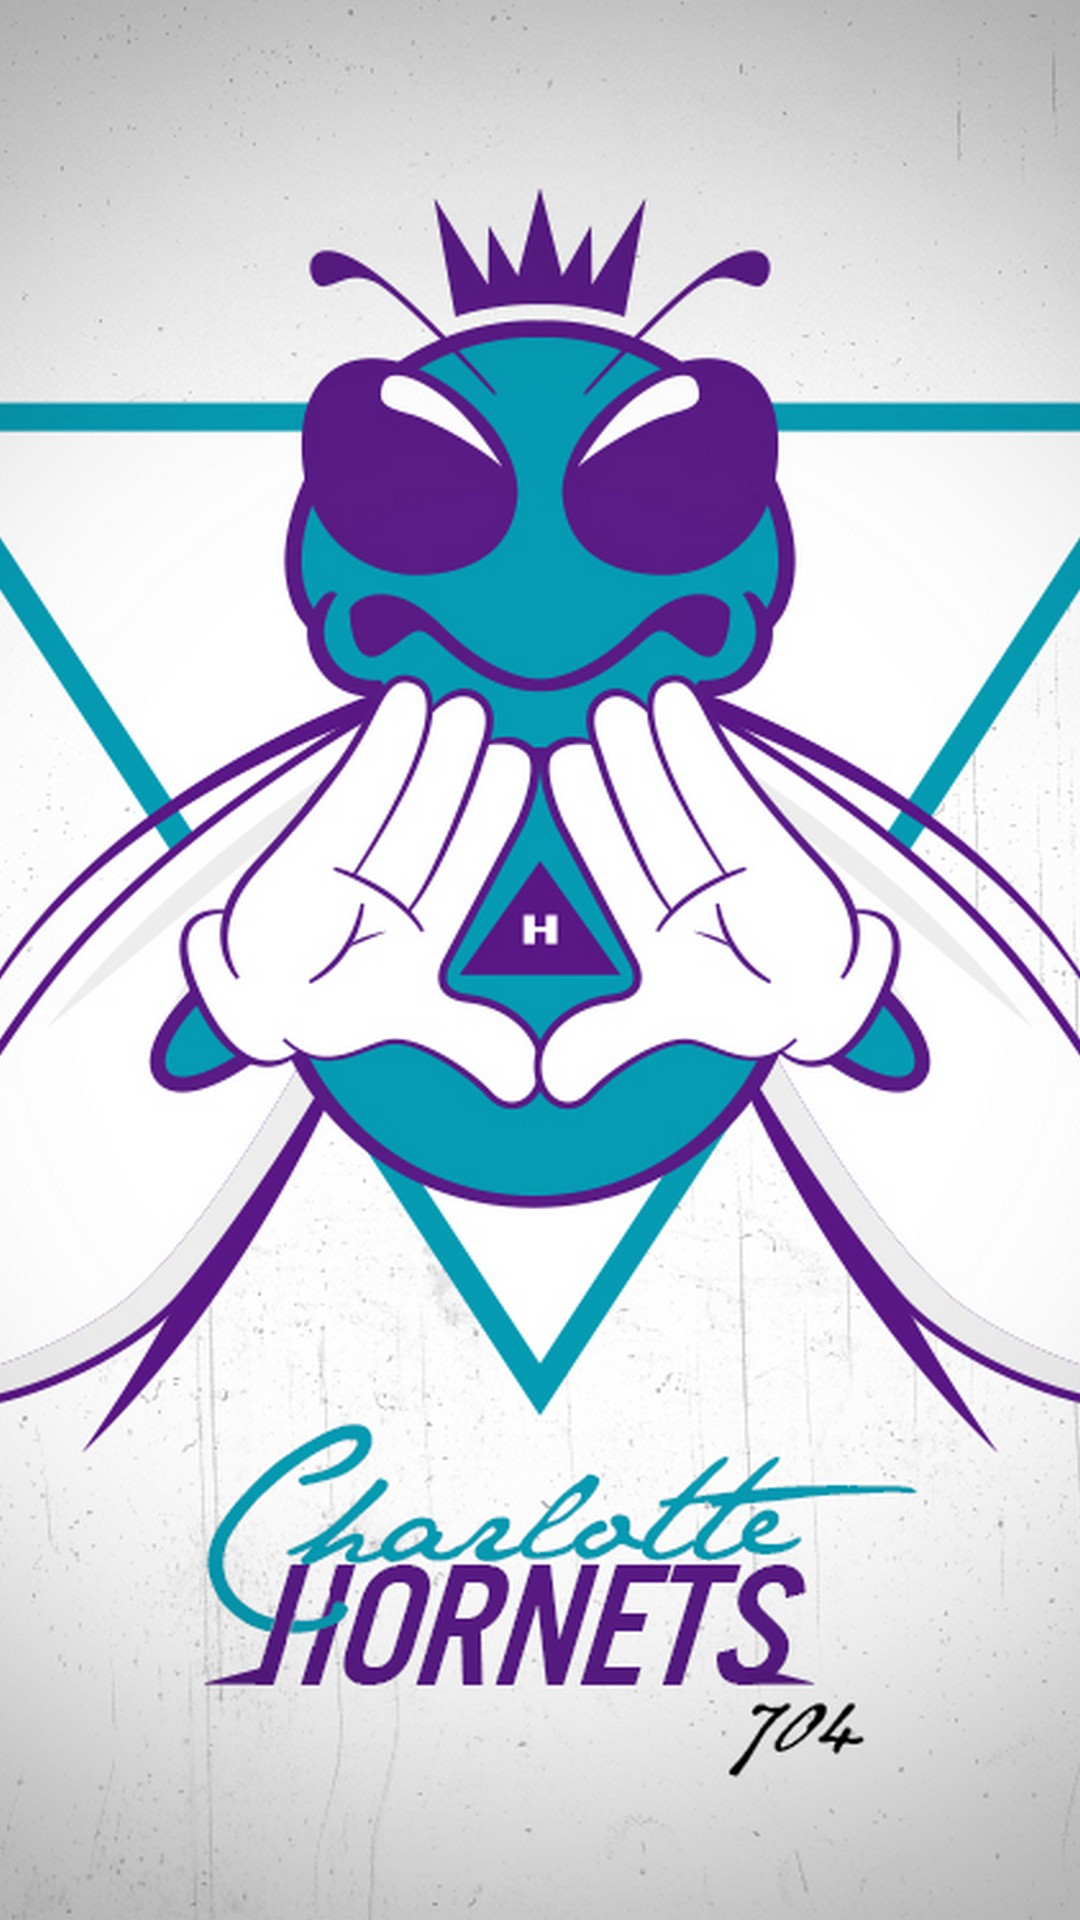 Charlotte Hornets HD Wallpaper For iPhone with high-resolution 1080x1920 pixel. You can use this wallpaper for your Desktop Computer Backgrounds, Windows or Mac Screensavers, iPhone Lock screen, Tablet or Android and another Mobile Phone device